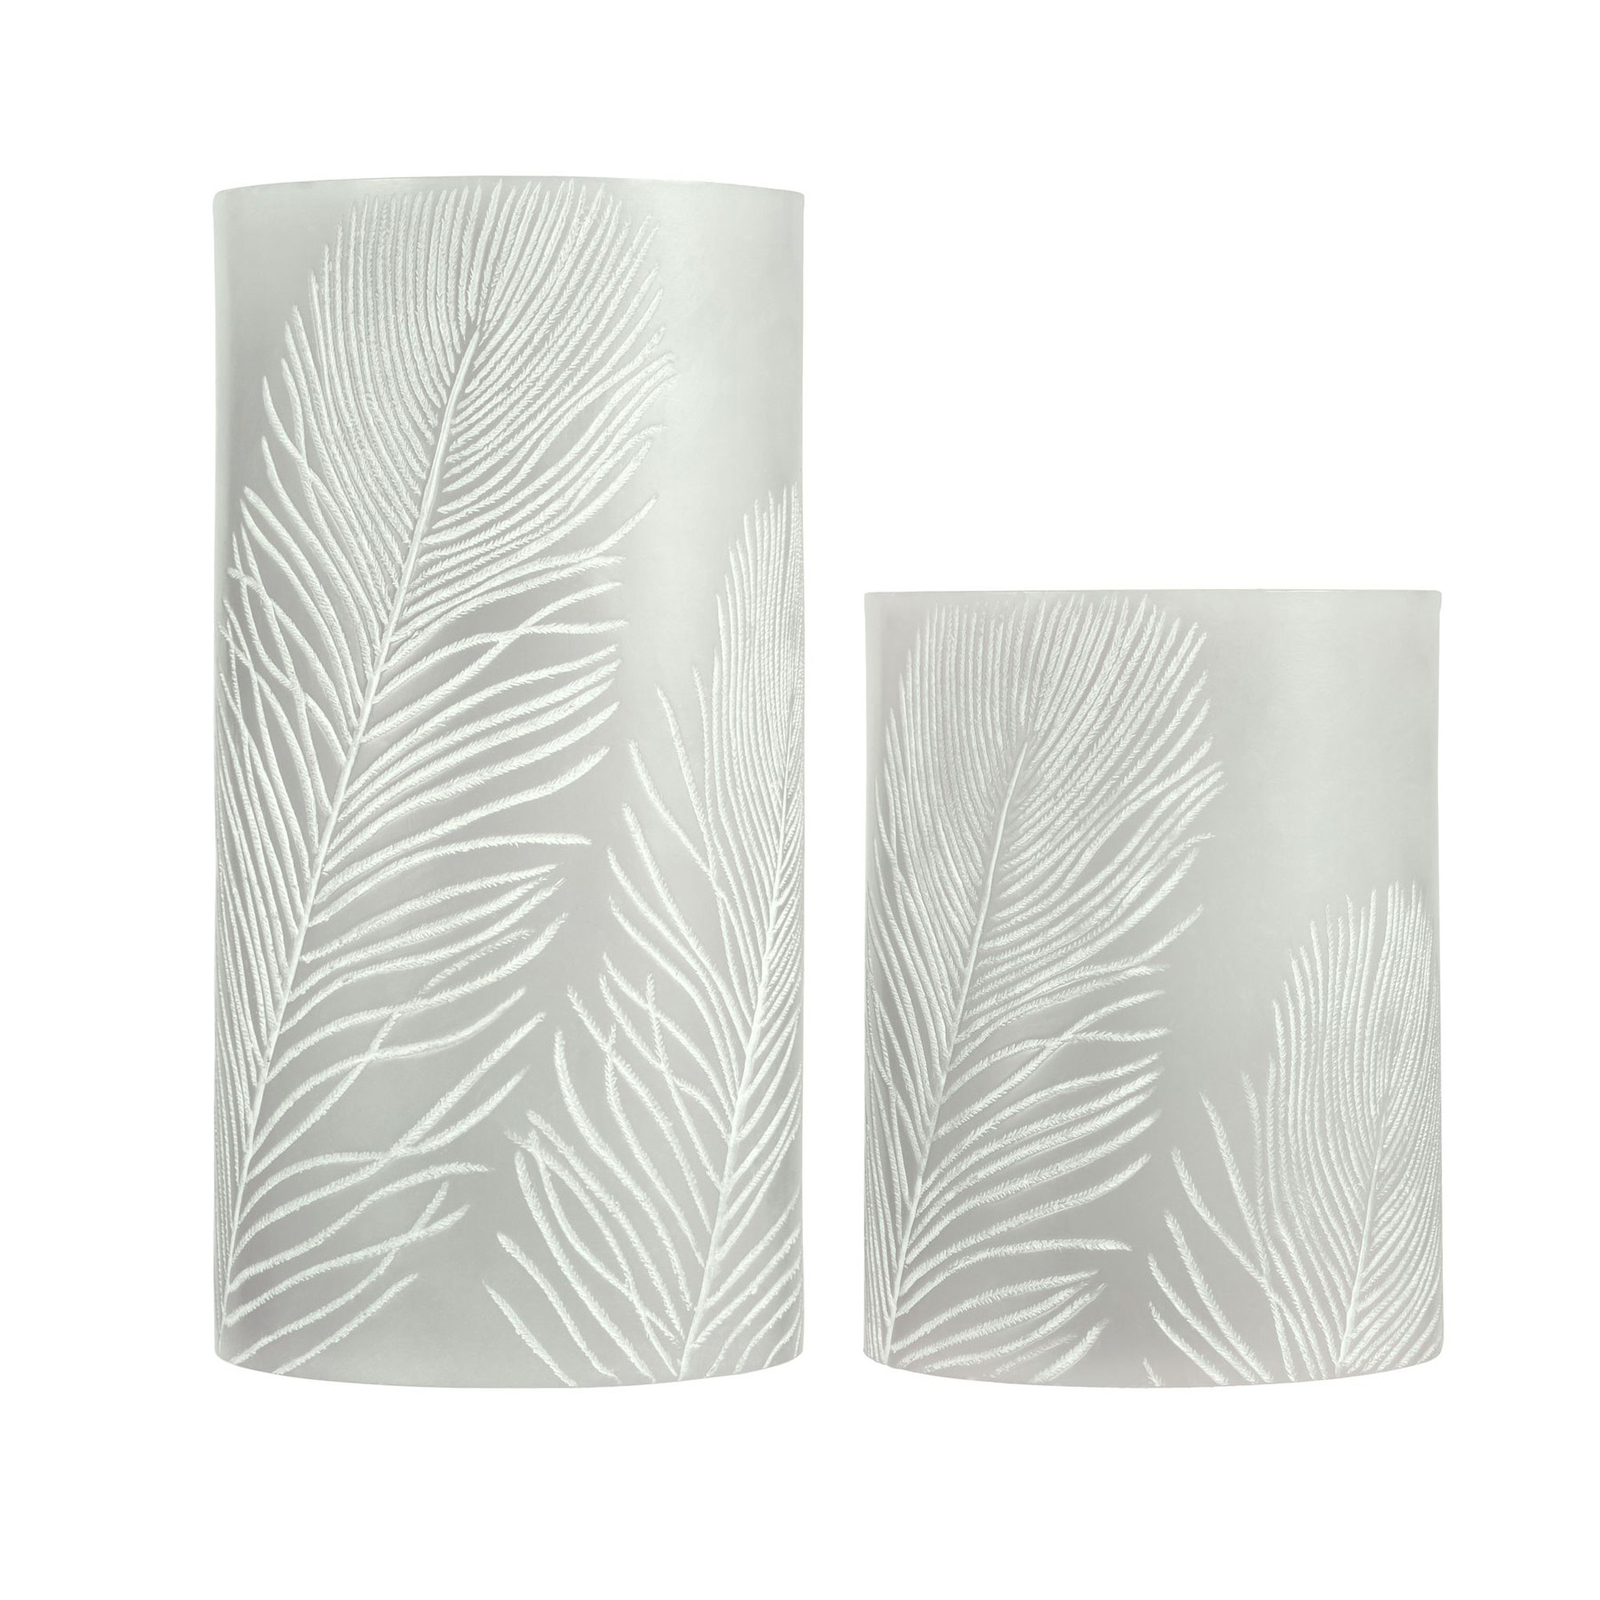 Pauleen Cosy Feather Candle LED candle set of 2